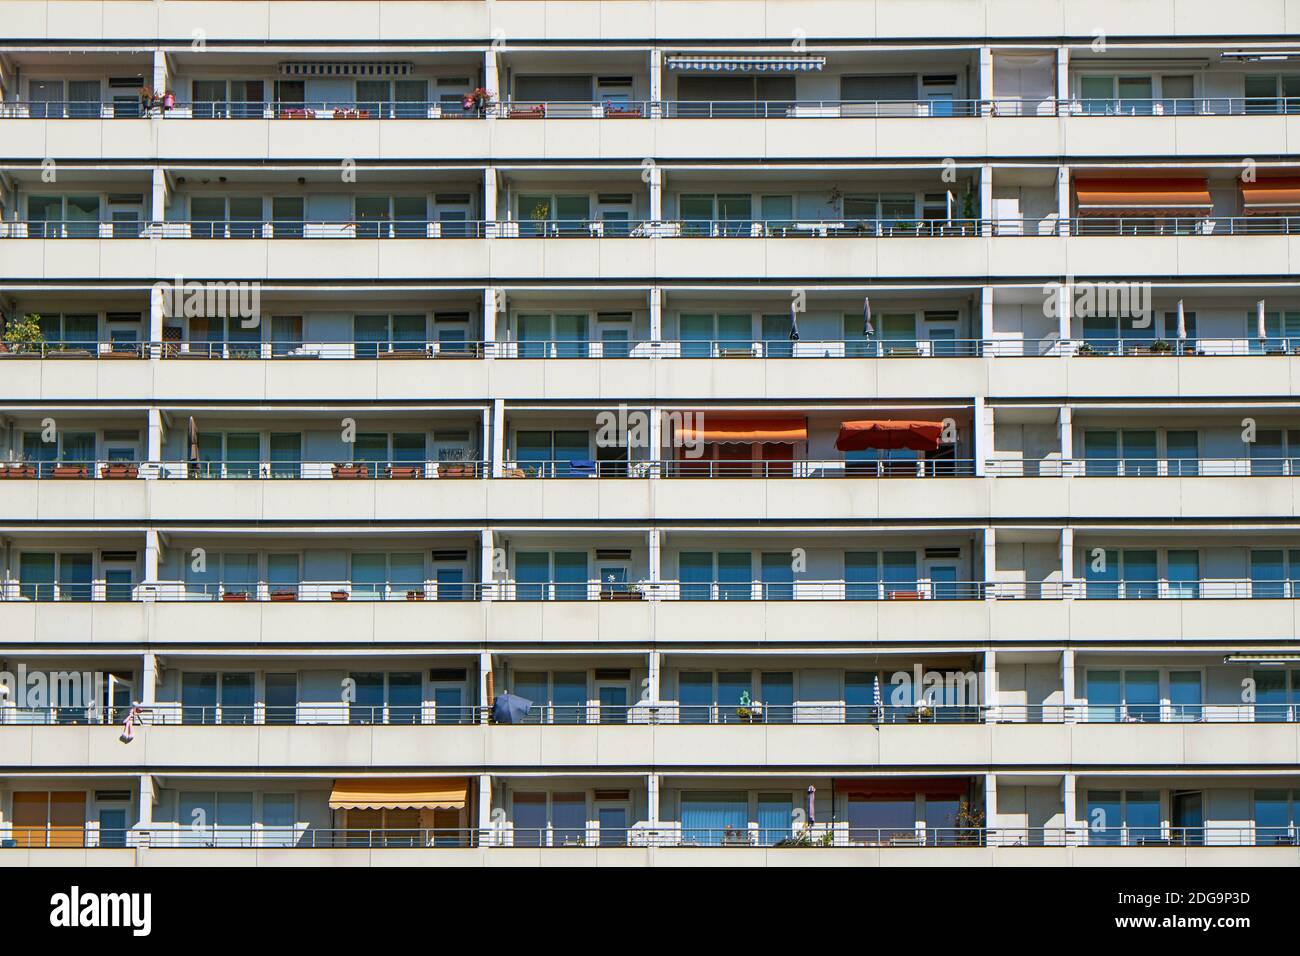 Facade of a prefabricated public housing building seen in Berlin, Germany Stock Photo